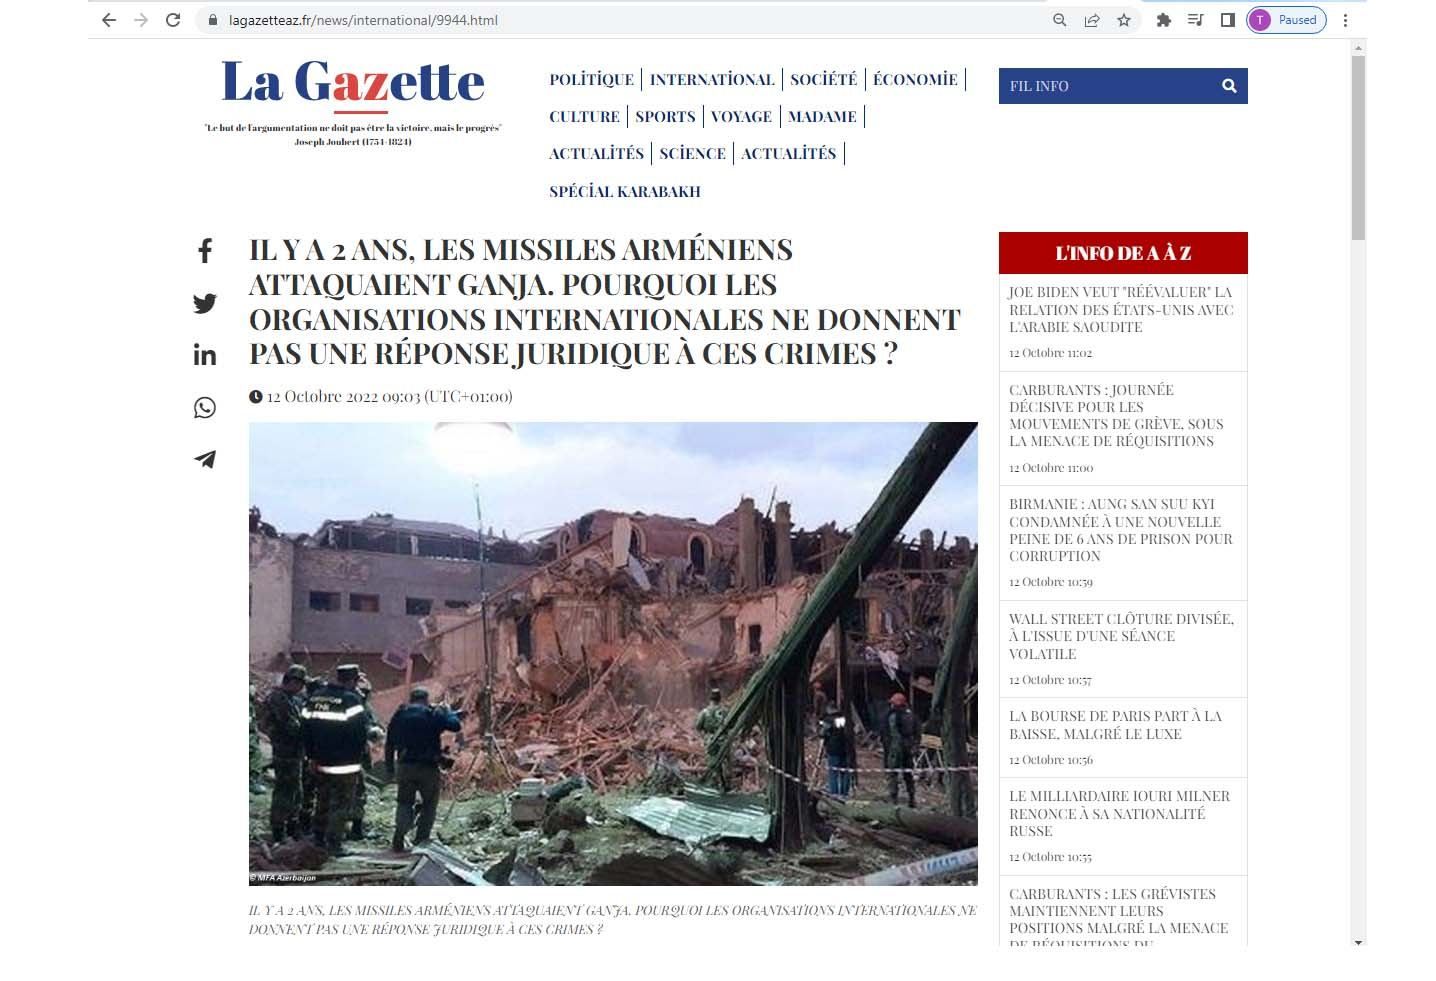 French media publishes article about lack of assessment from international organization of Armenia's missile attacks on Azerbaijan's Ganja city